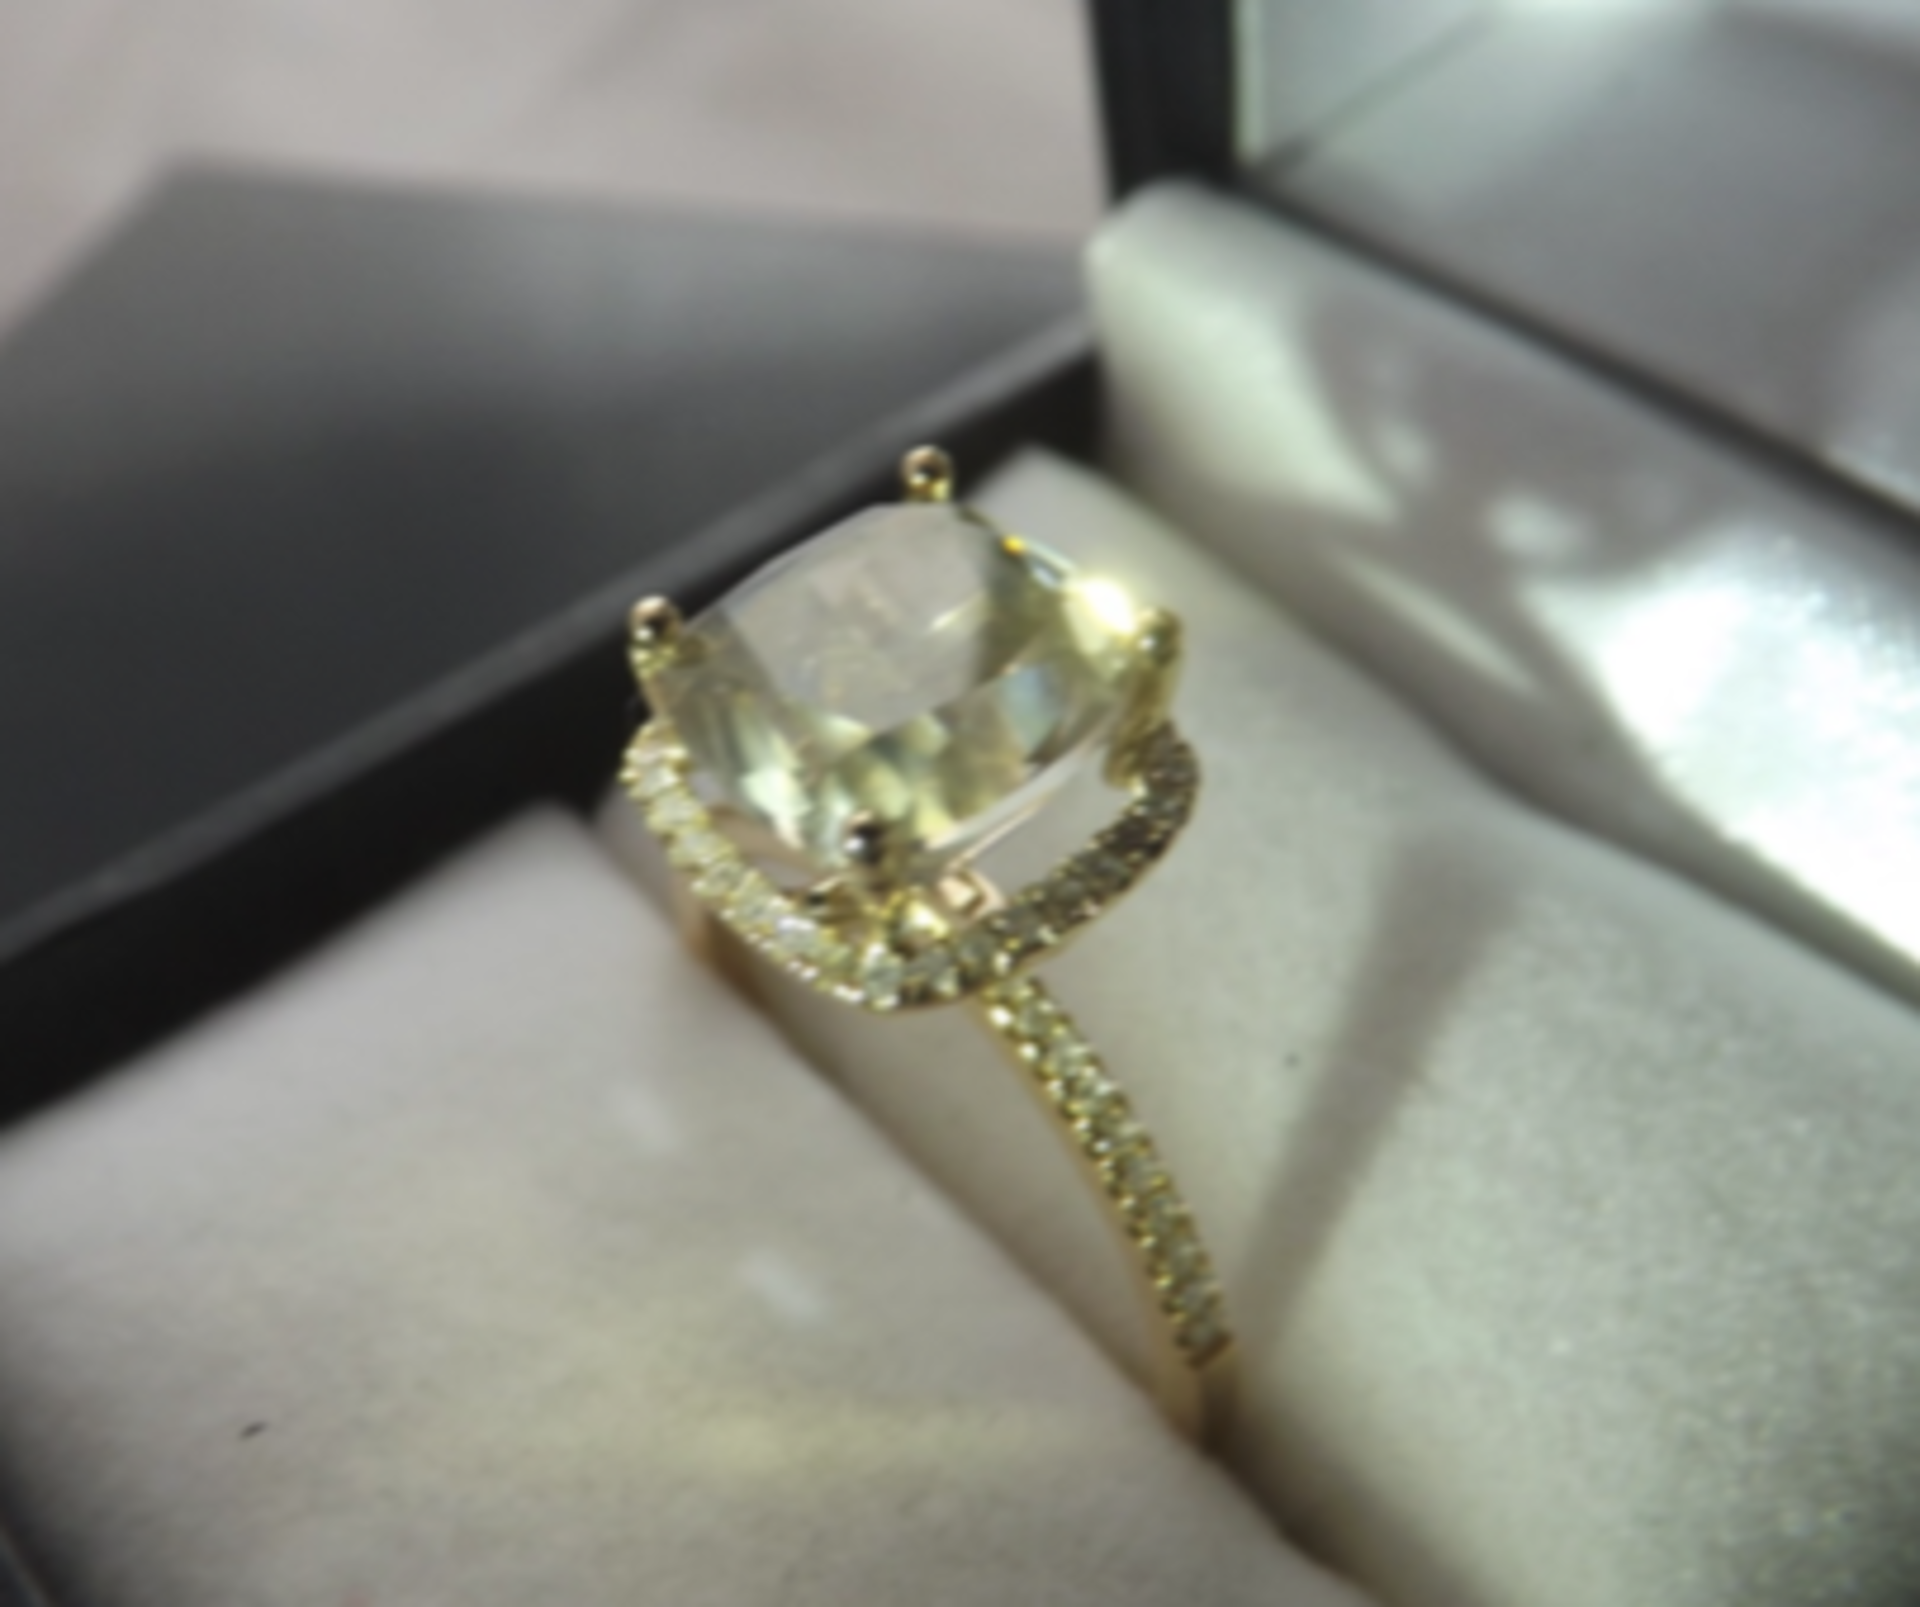 4.5ct Brilliant Cut Diamond Ring set in a 10k Yellow Gold Band. - Image 4 of 4